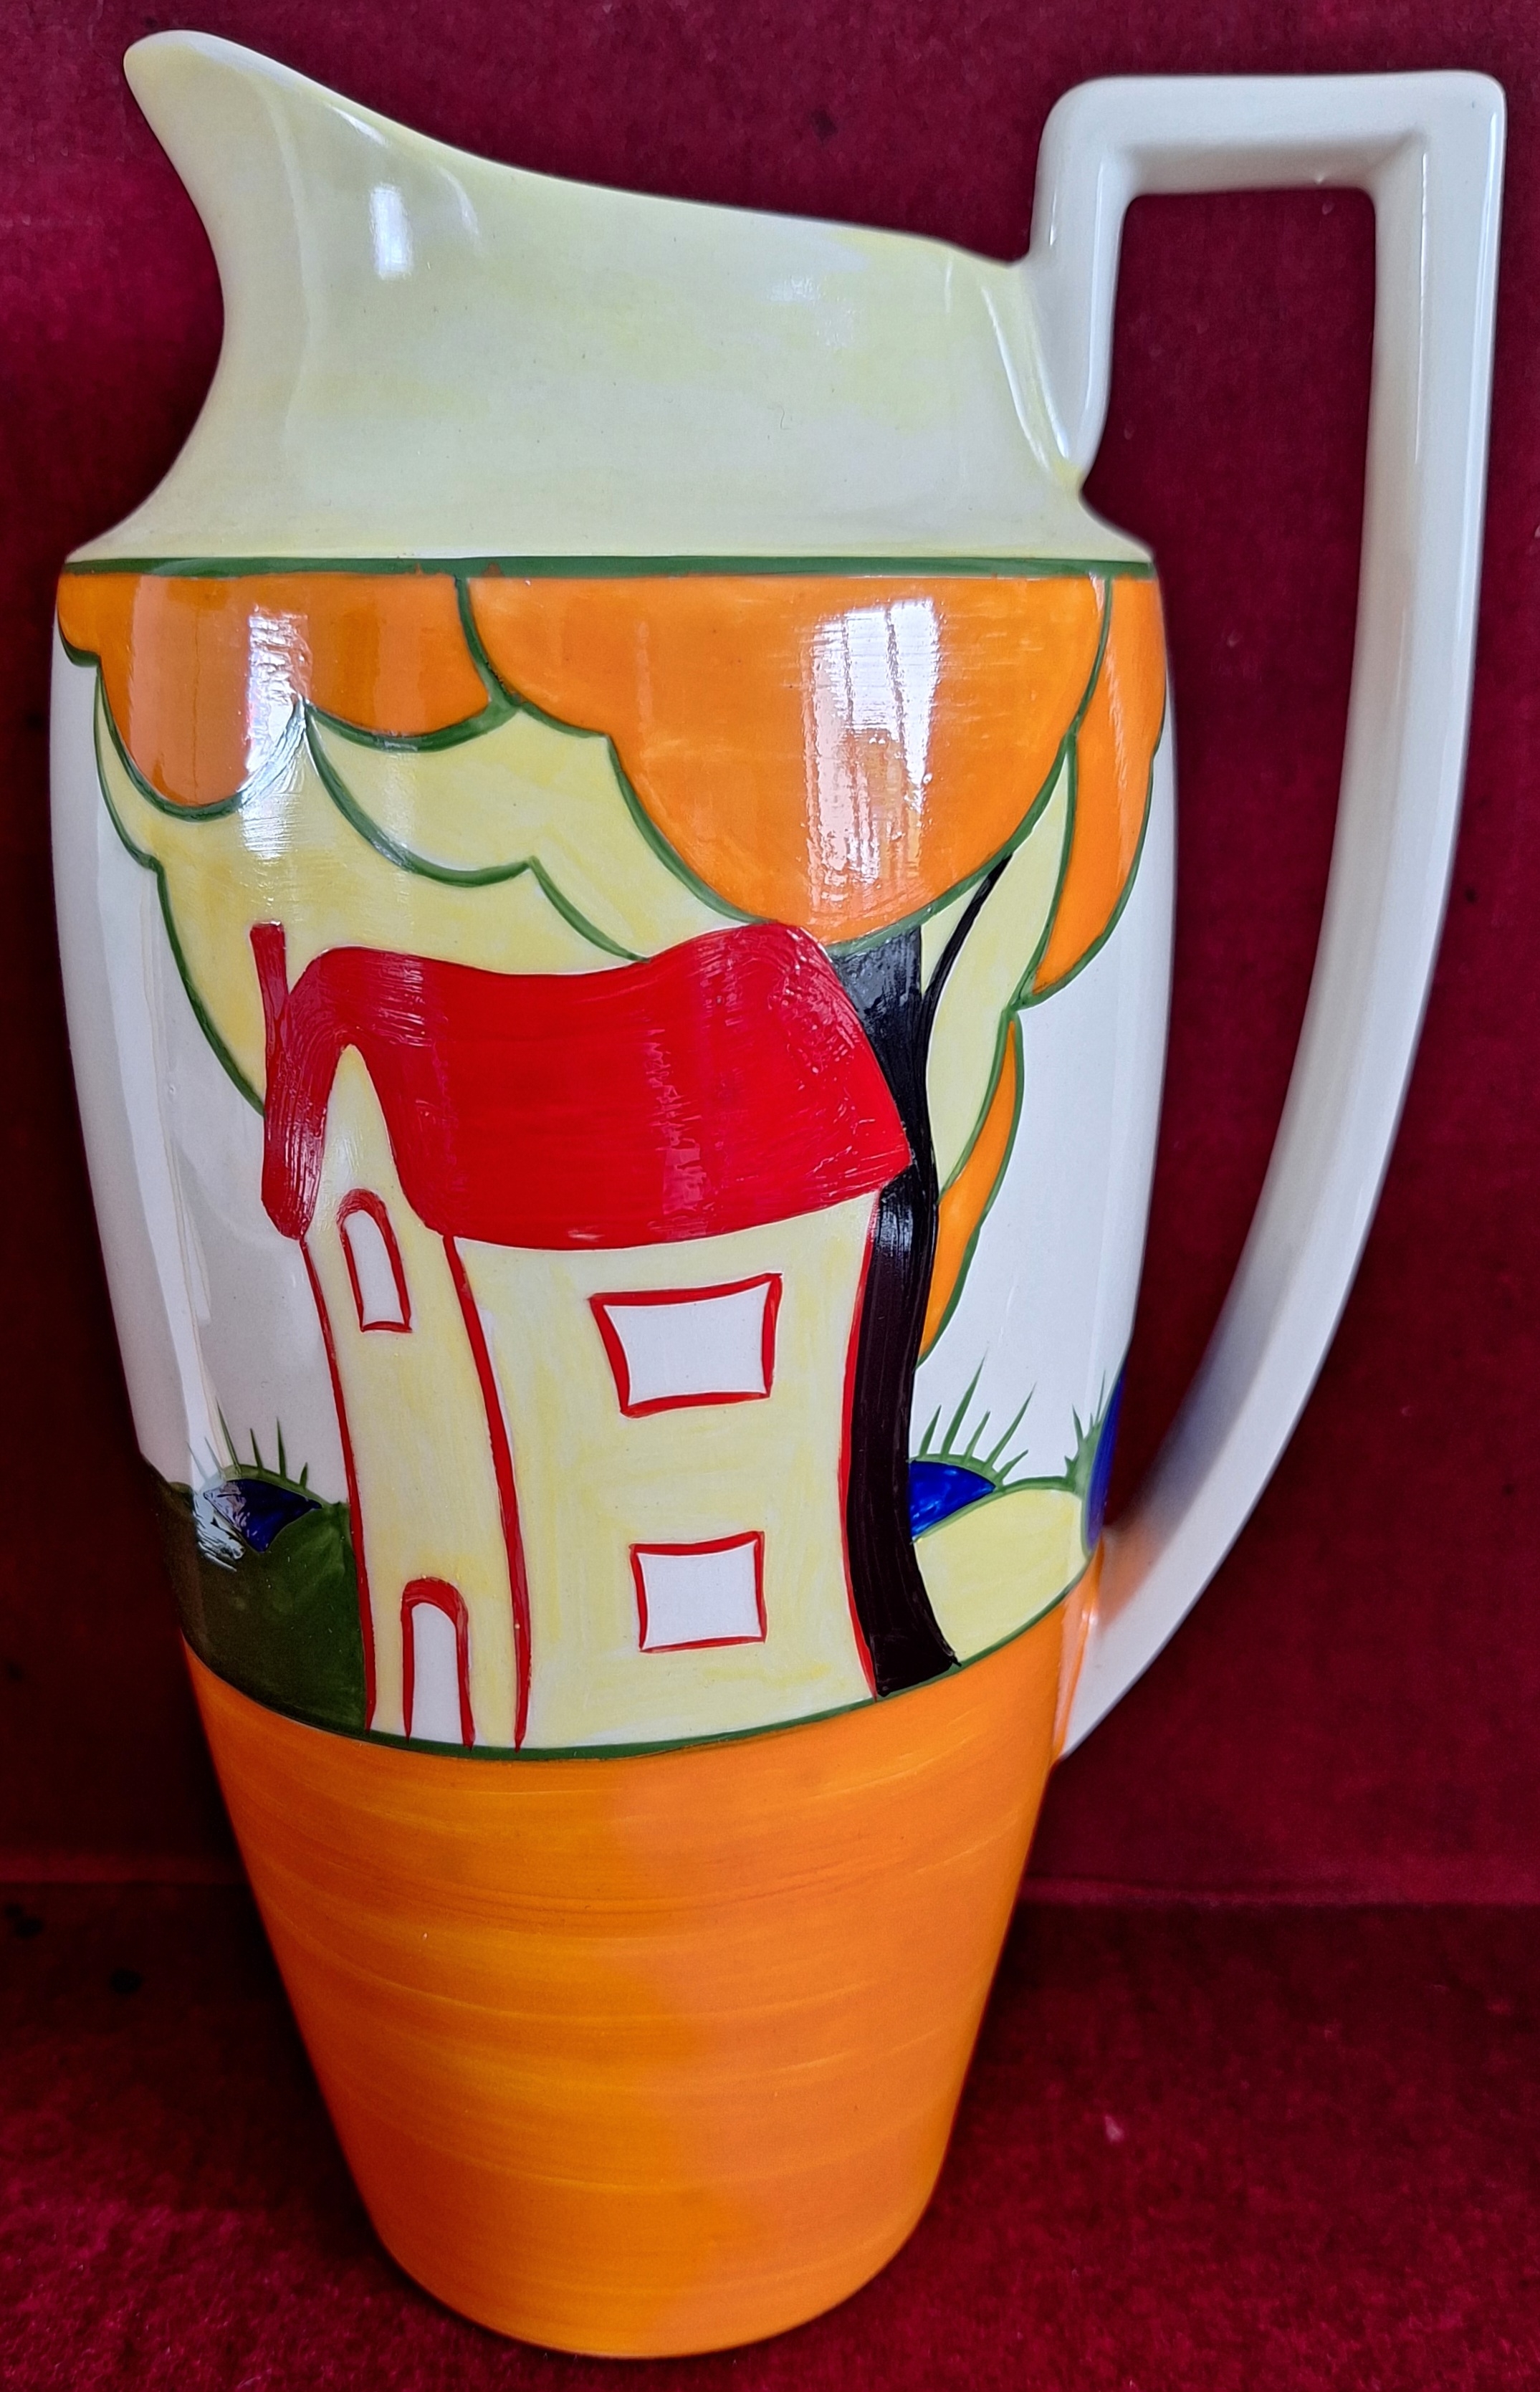 HERON CROSS POTTERY LIMITED EDITION HANDPAINTED JUG "ENCHANTED WOOD" BY DENISE STEELE